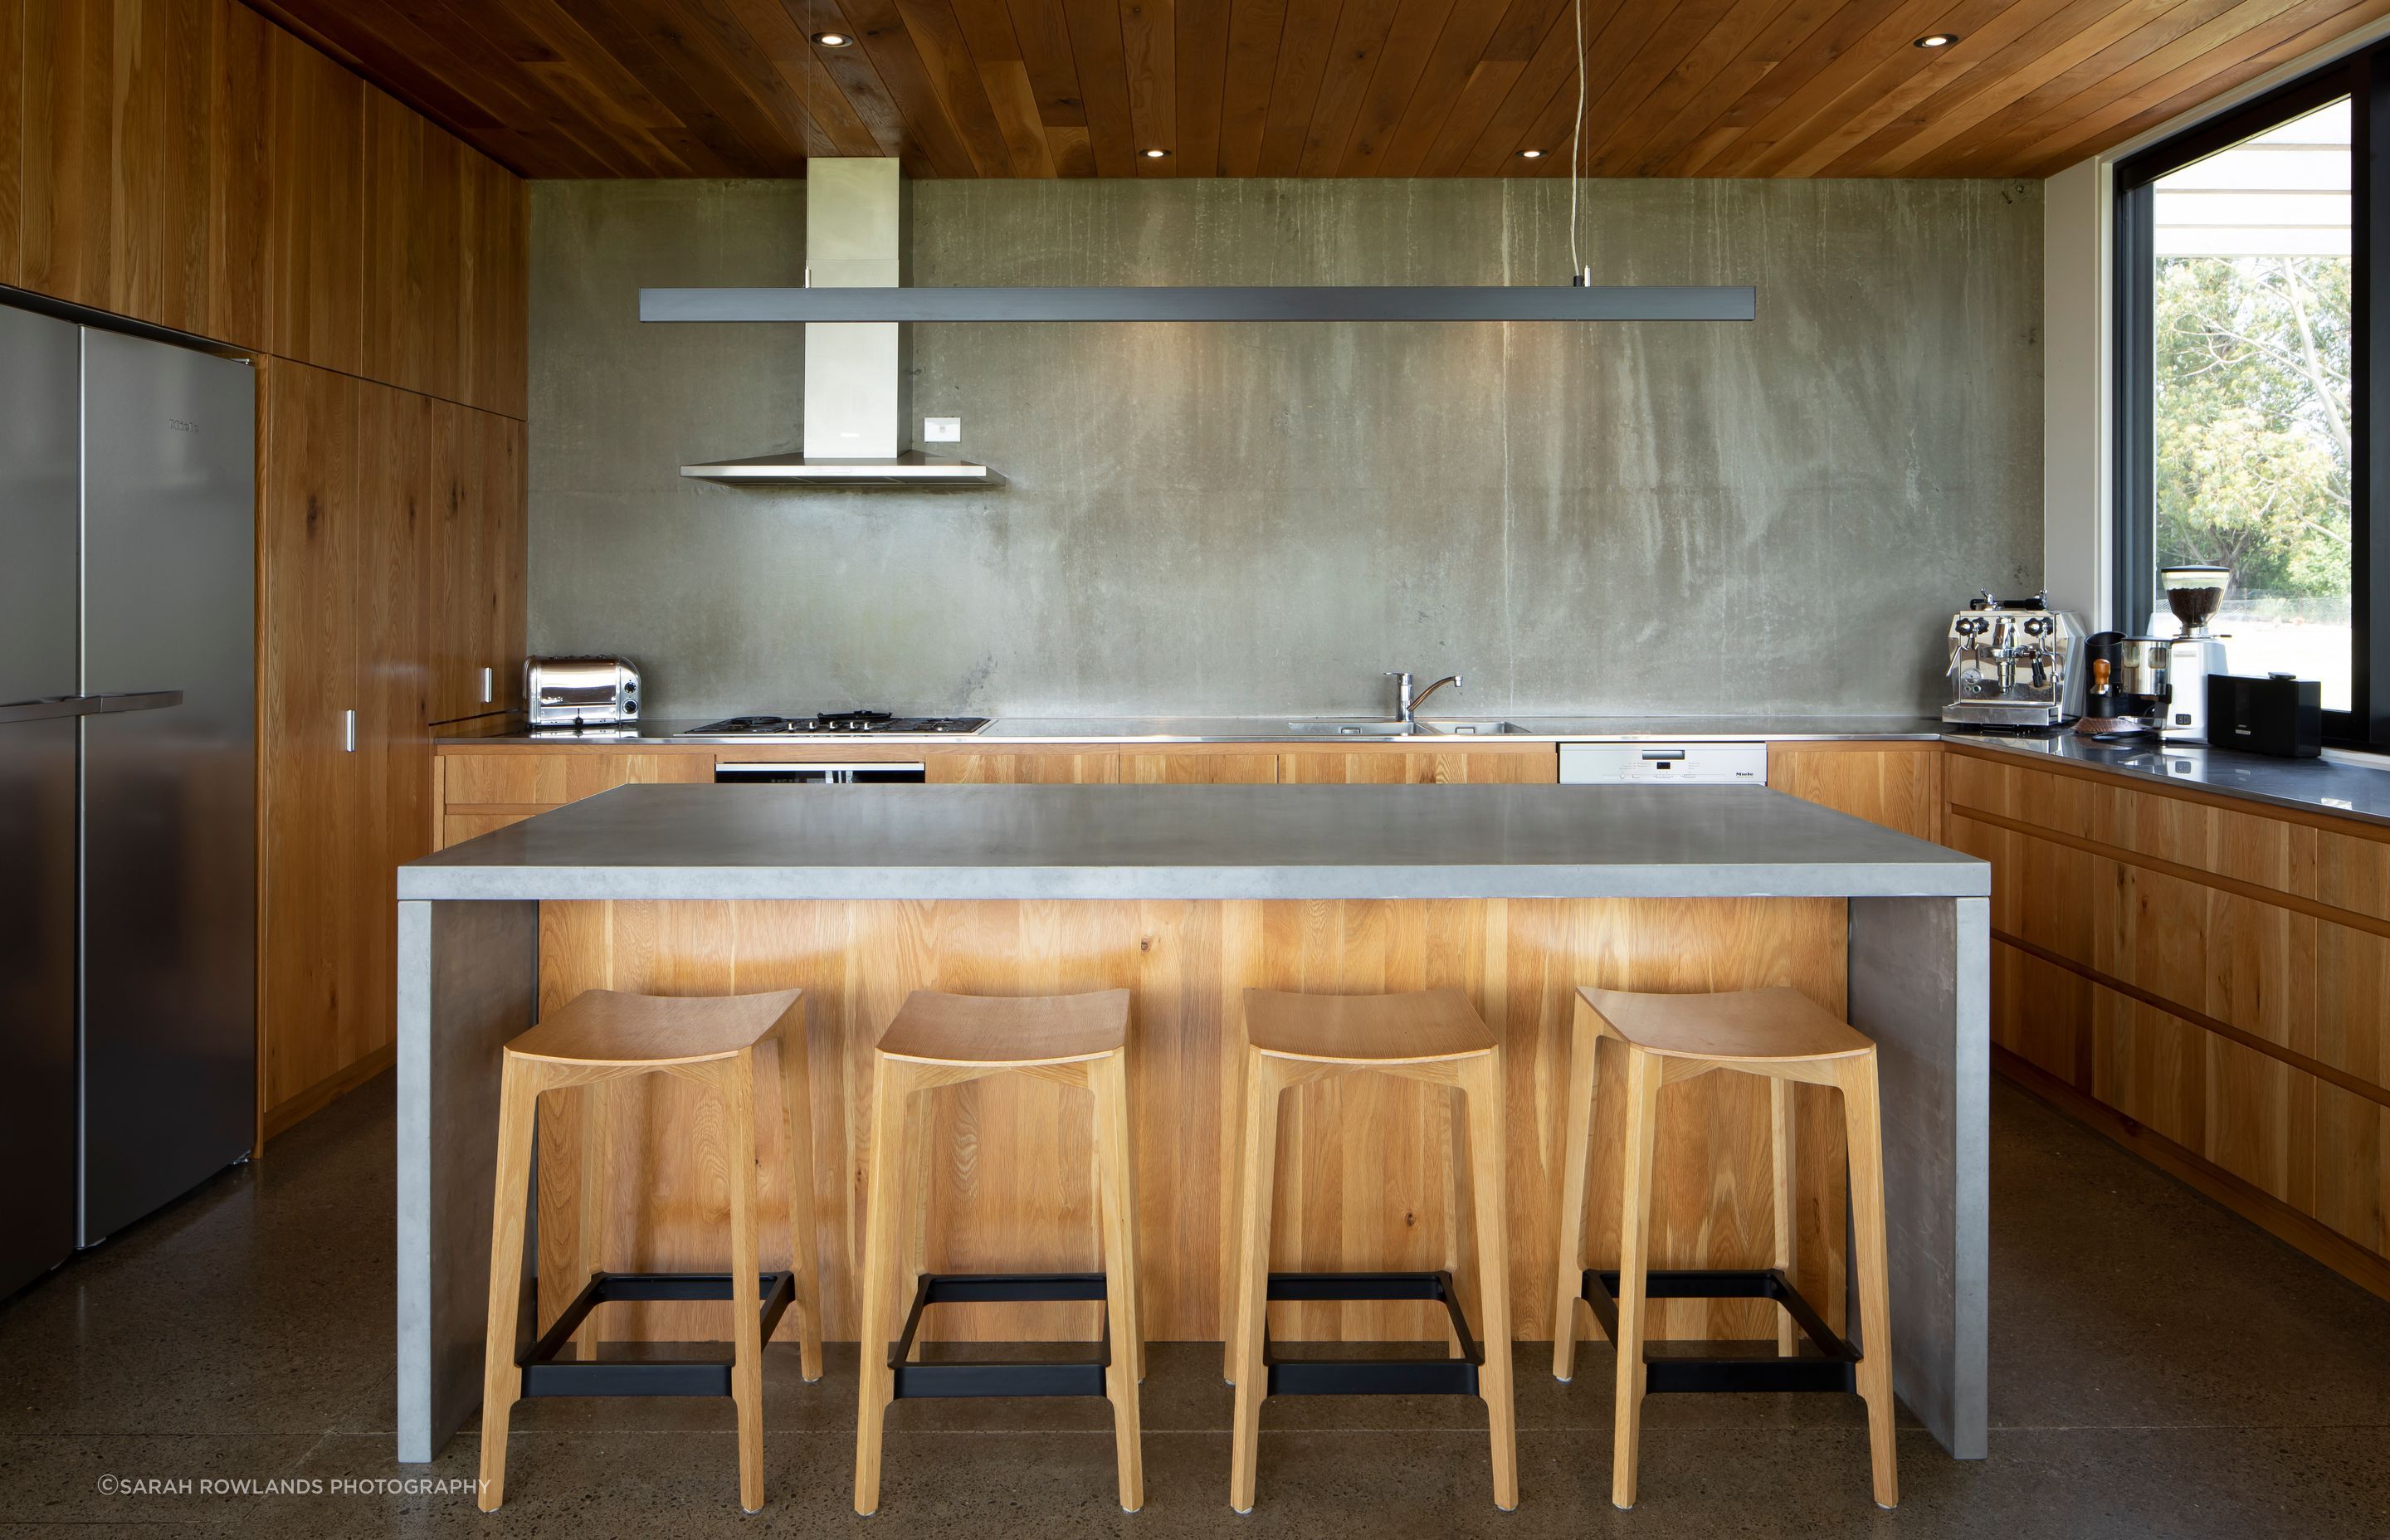 The lower ceiling height of the oak and concrete kitchen creates an intimate feeling within the space.